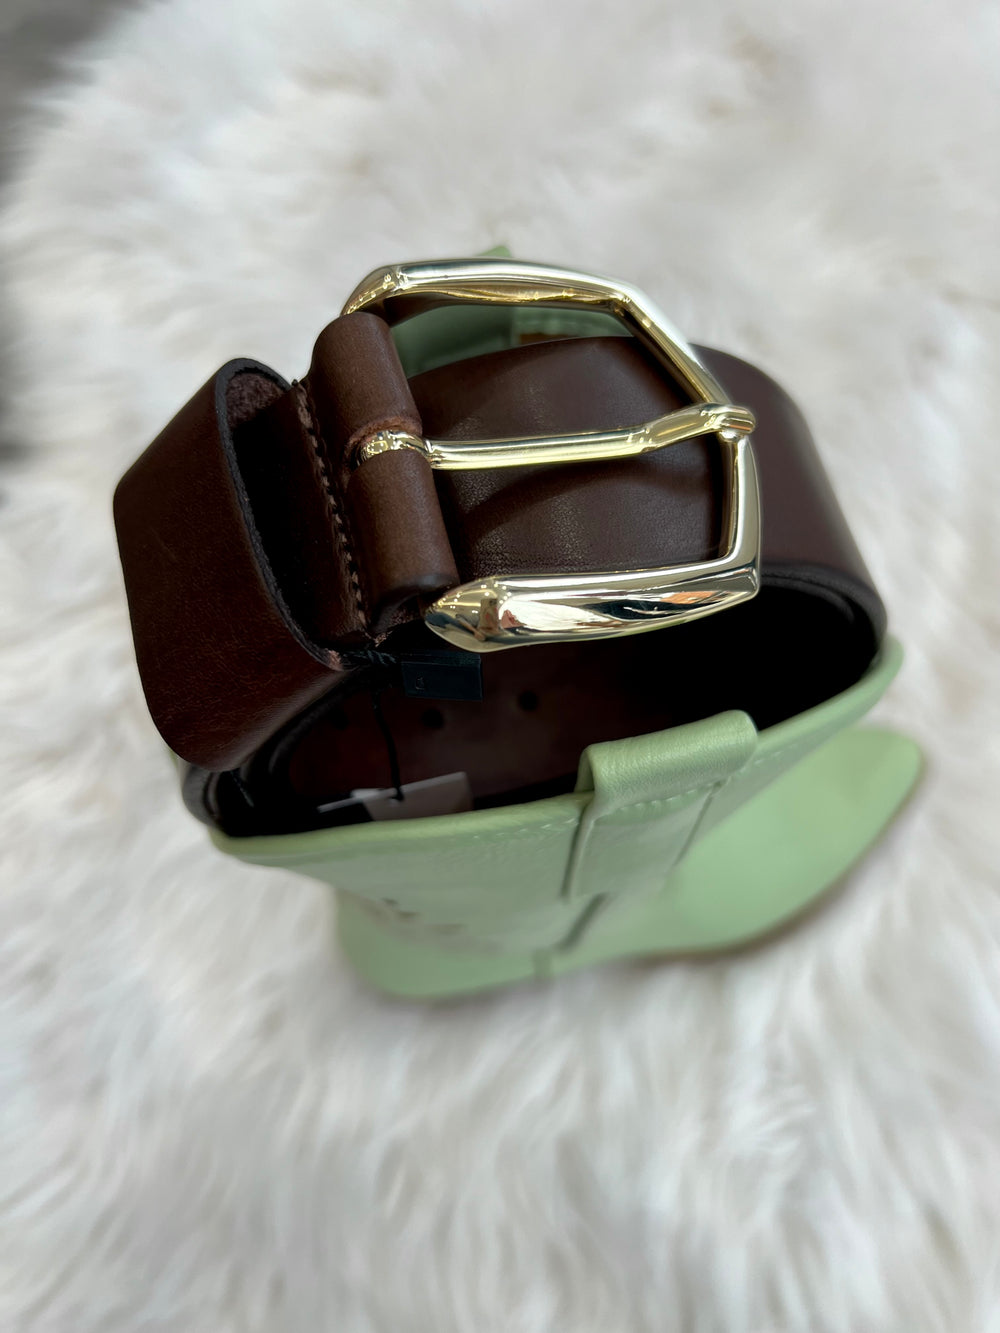 THE HEX BROWN LEATHER BELT